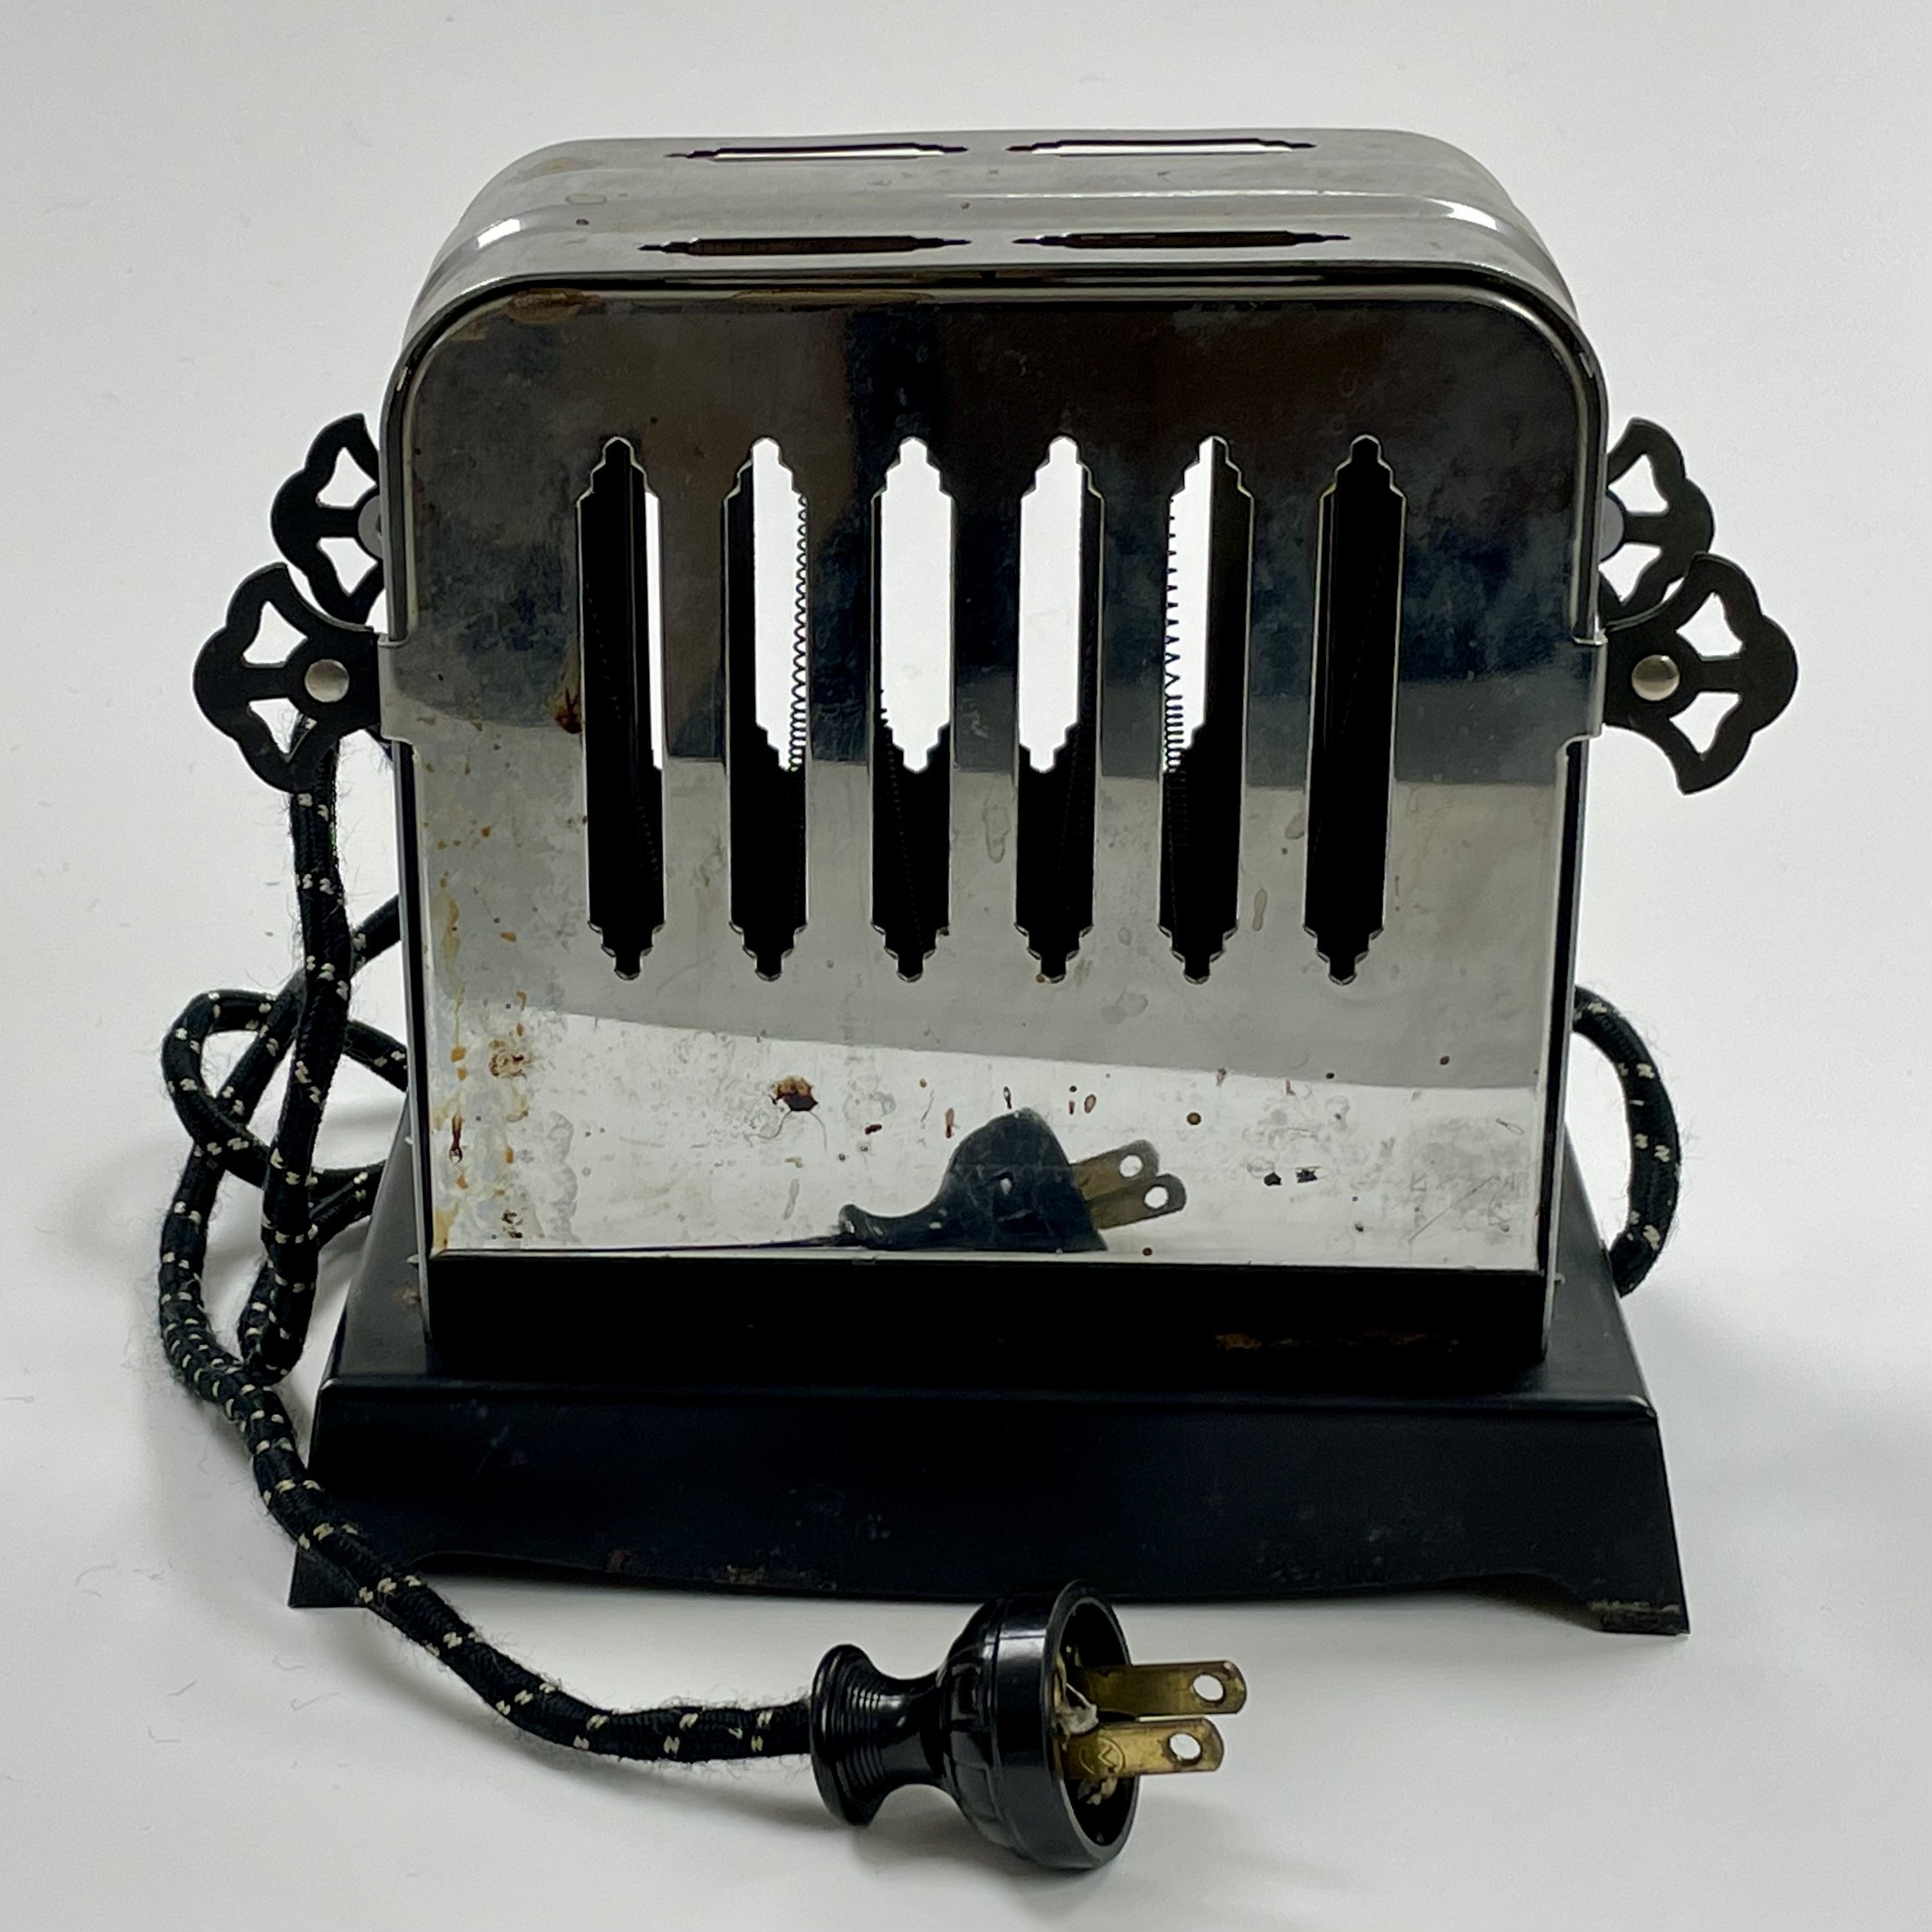 A silver electric toaster. There are slots on each side for the bread, and the cord and plug are coiled in front.